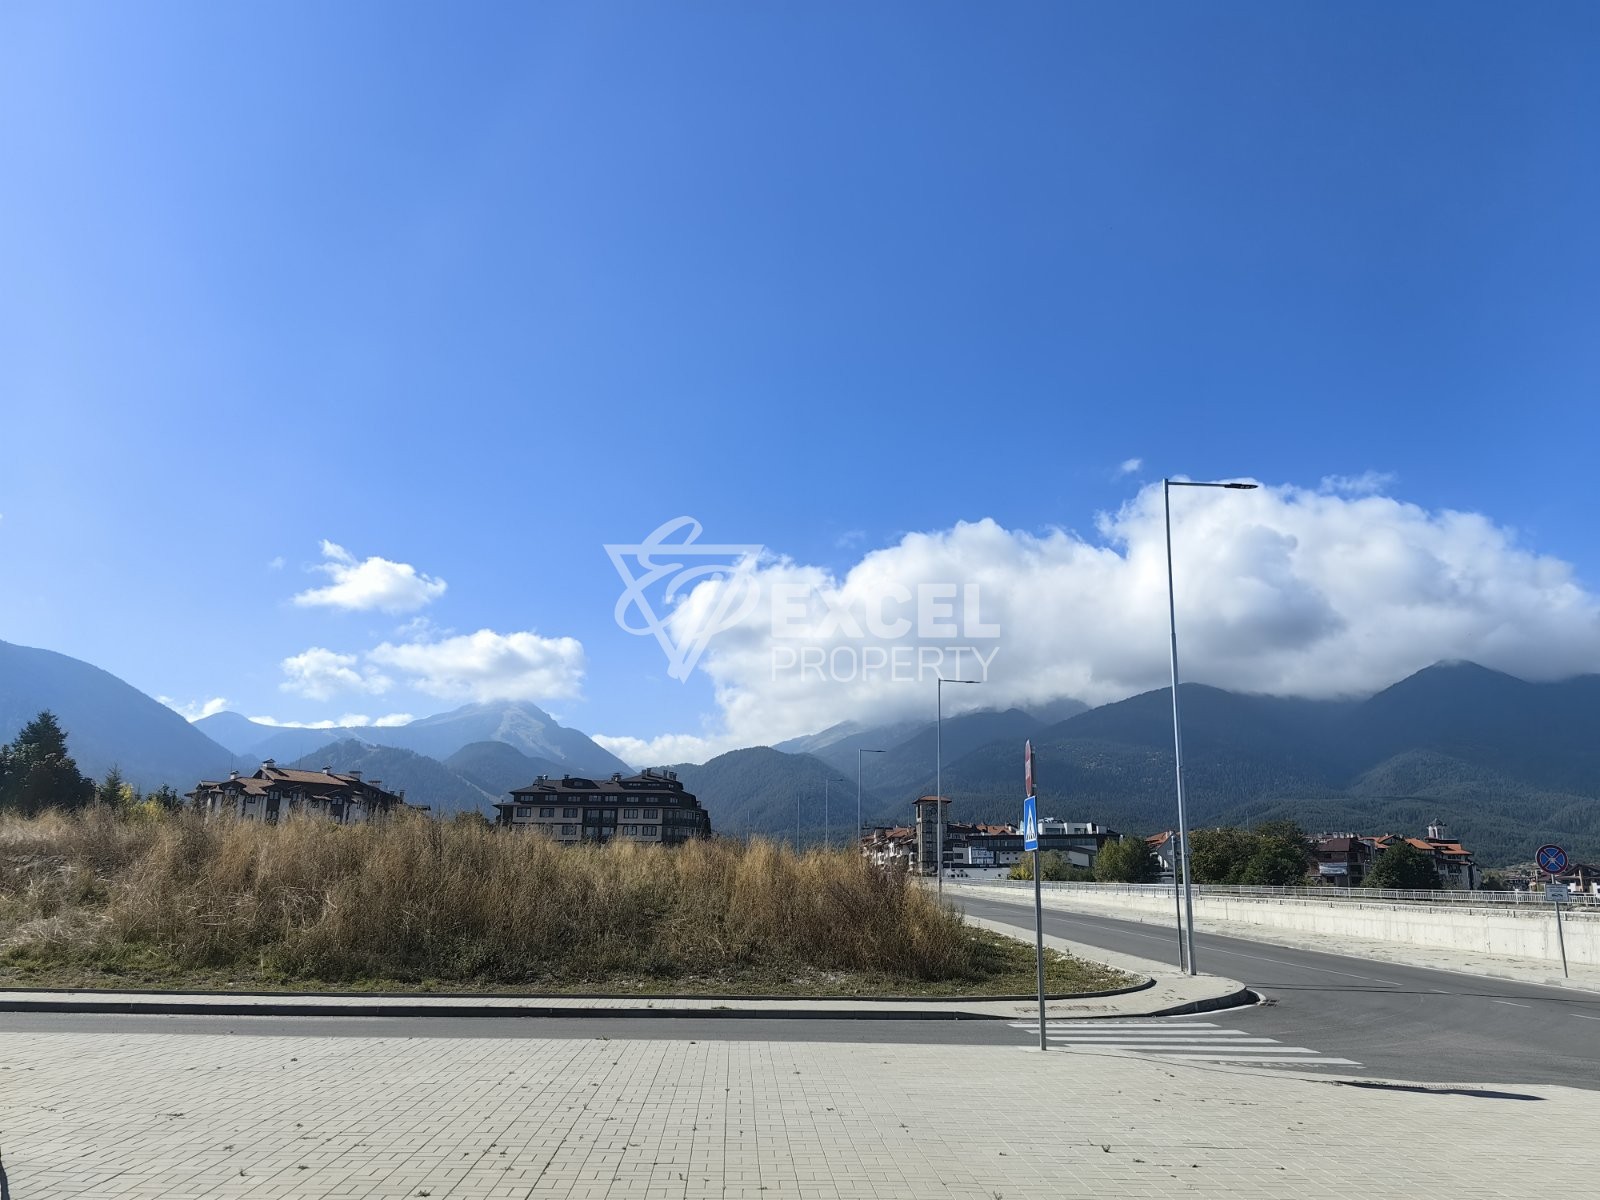 One-bedroom apartment with south exposure, 400m from the ski lift in Bansko